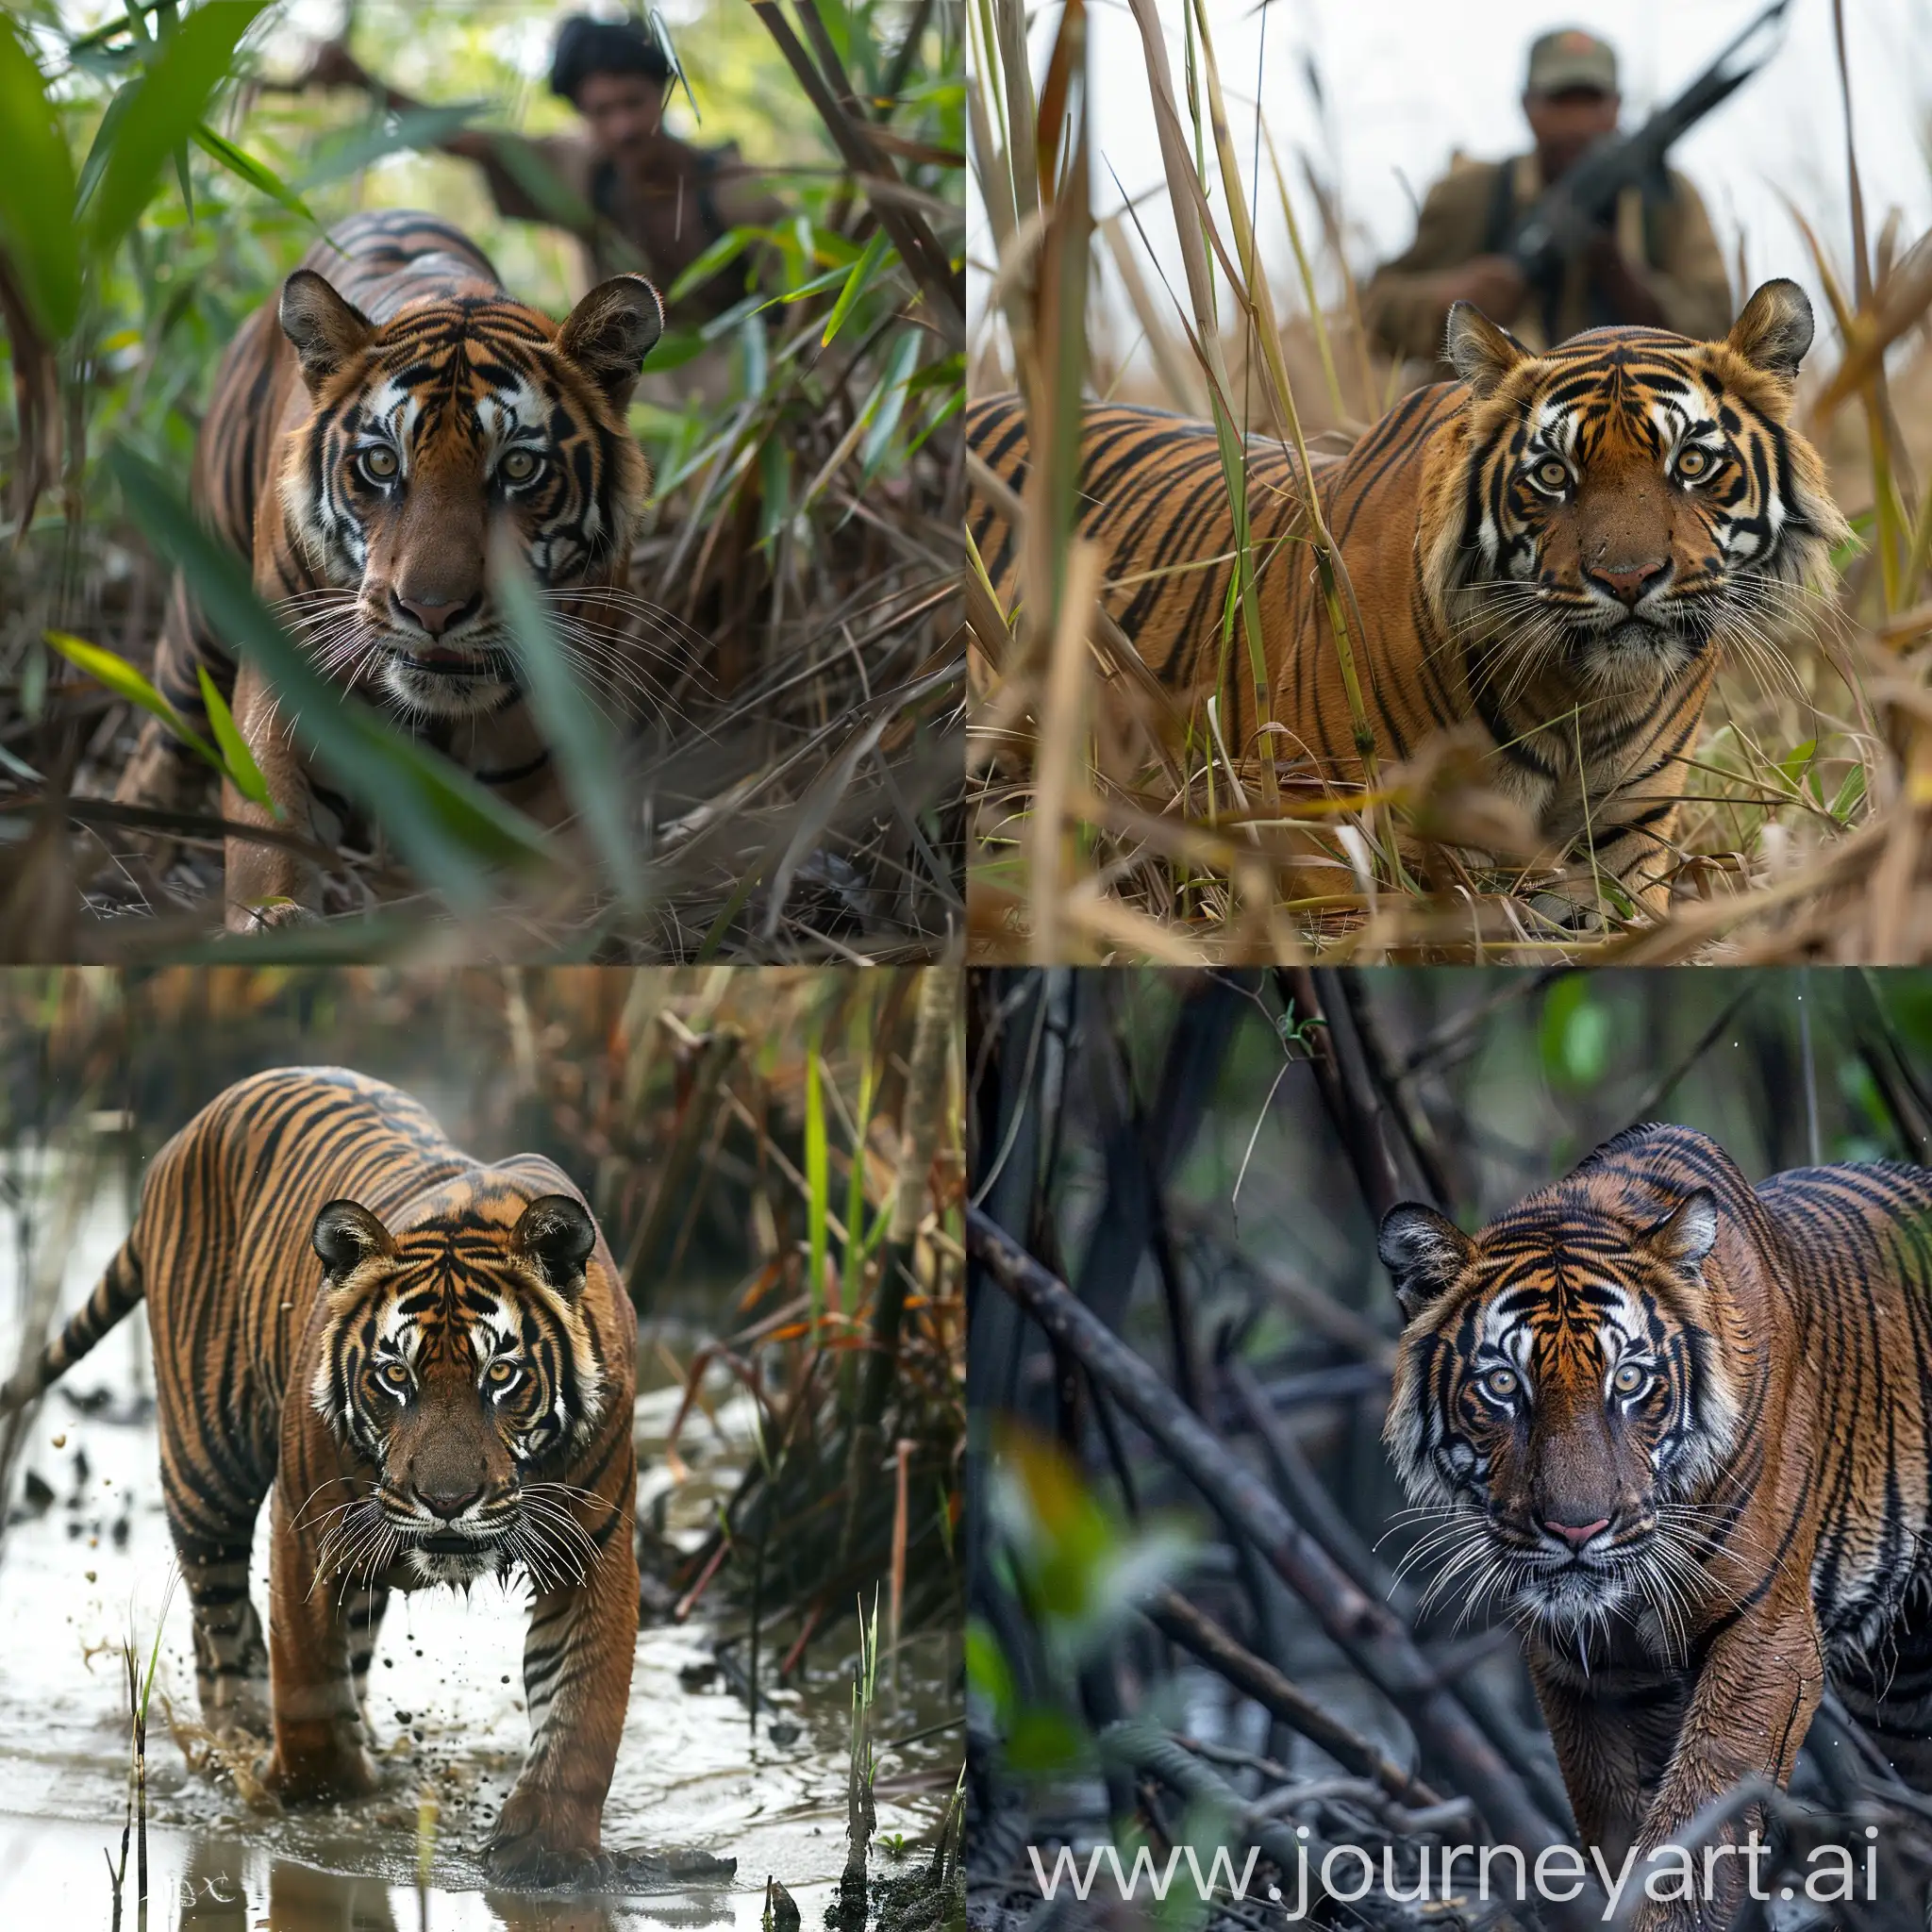 Tigers-and-Poachers-in-the-Sundarbans-Forest